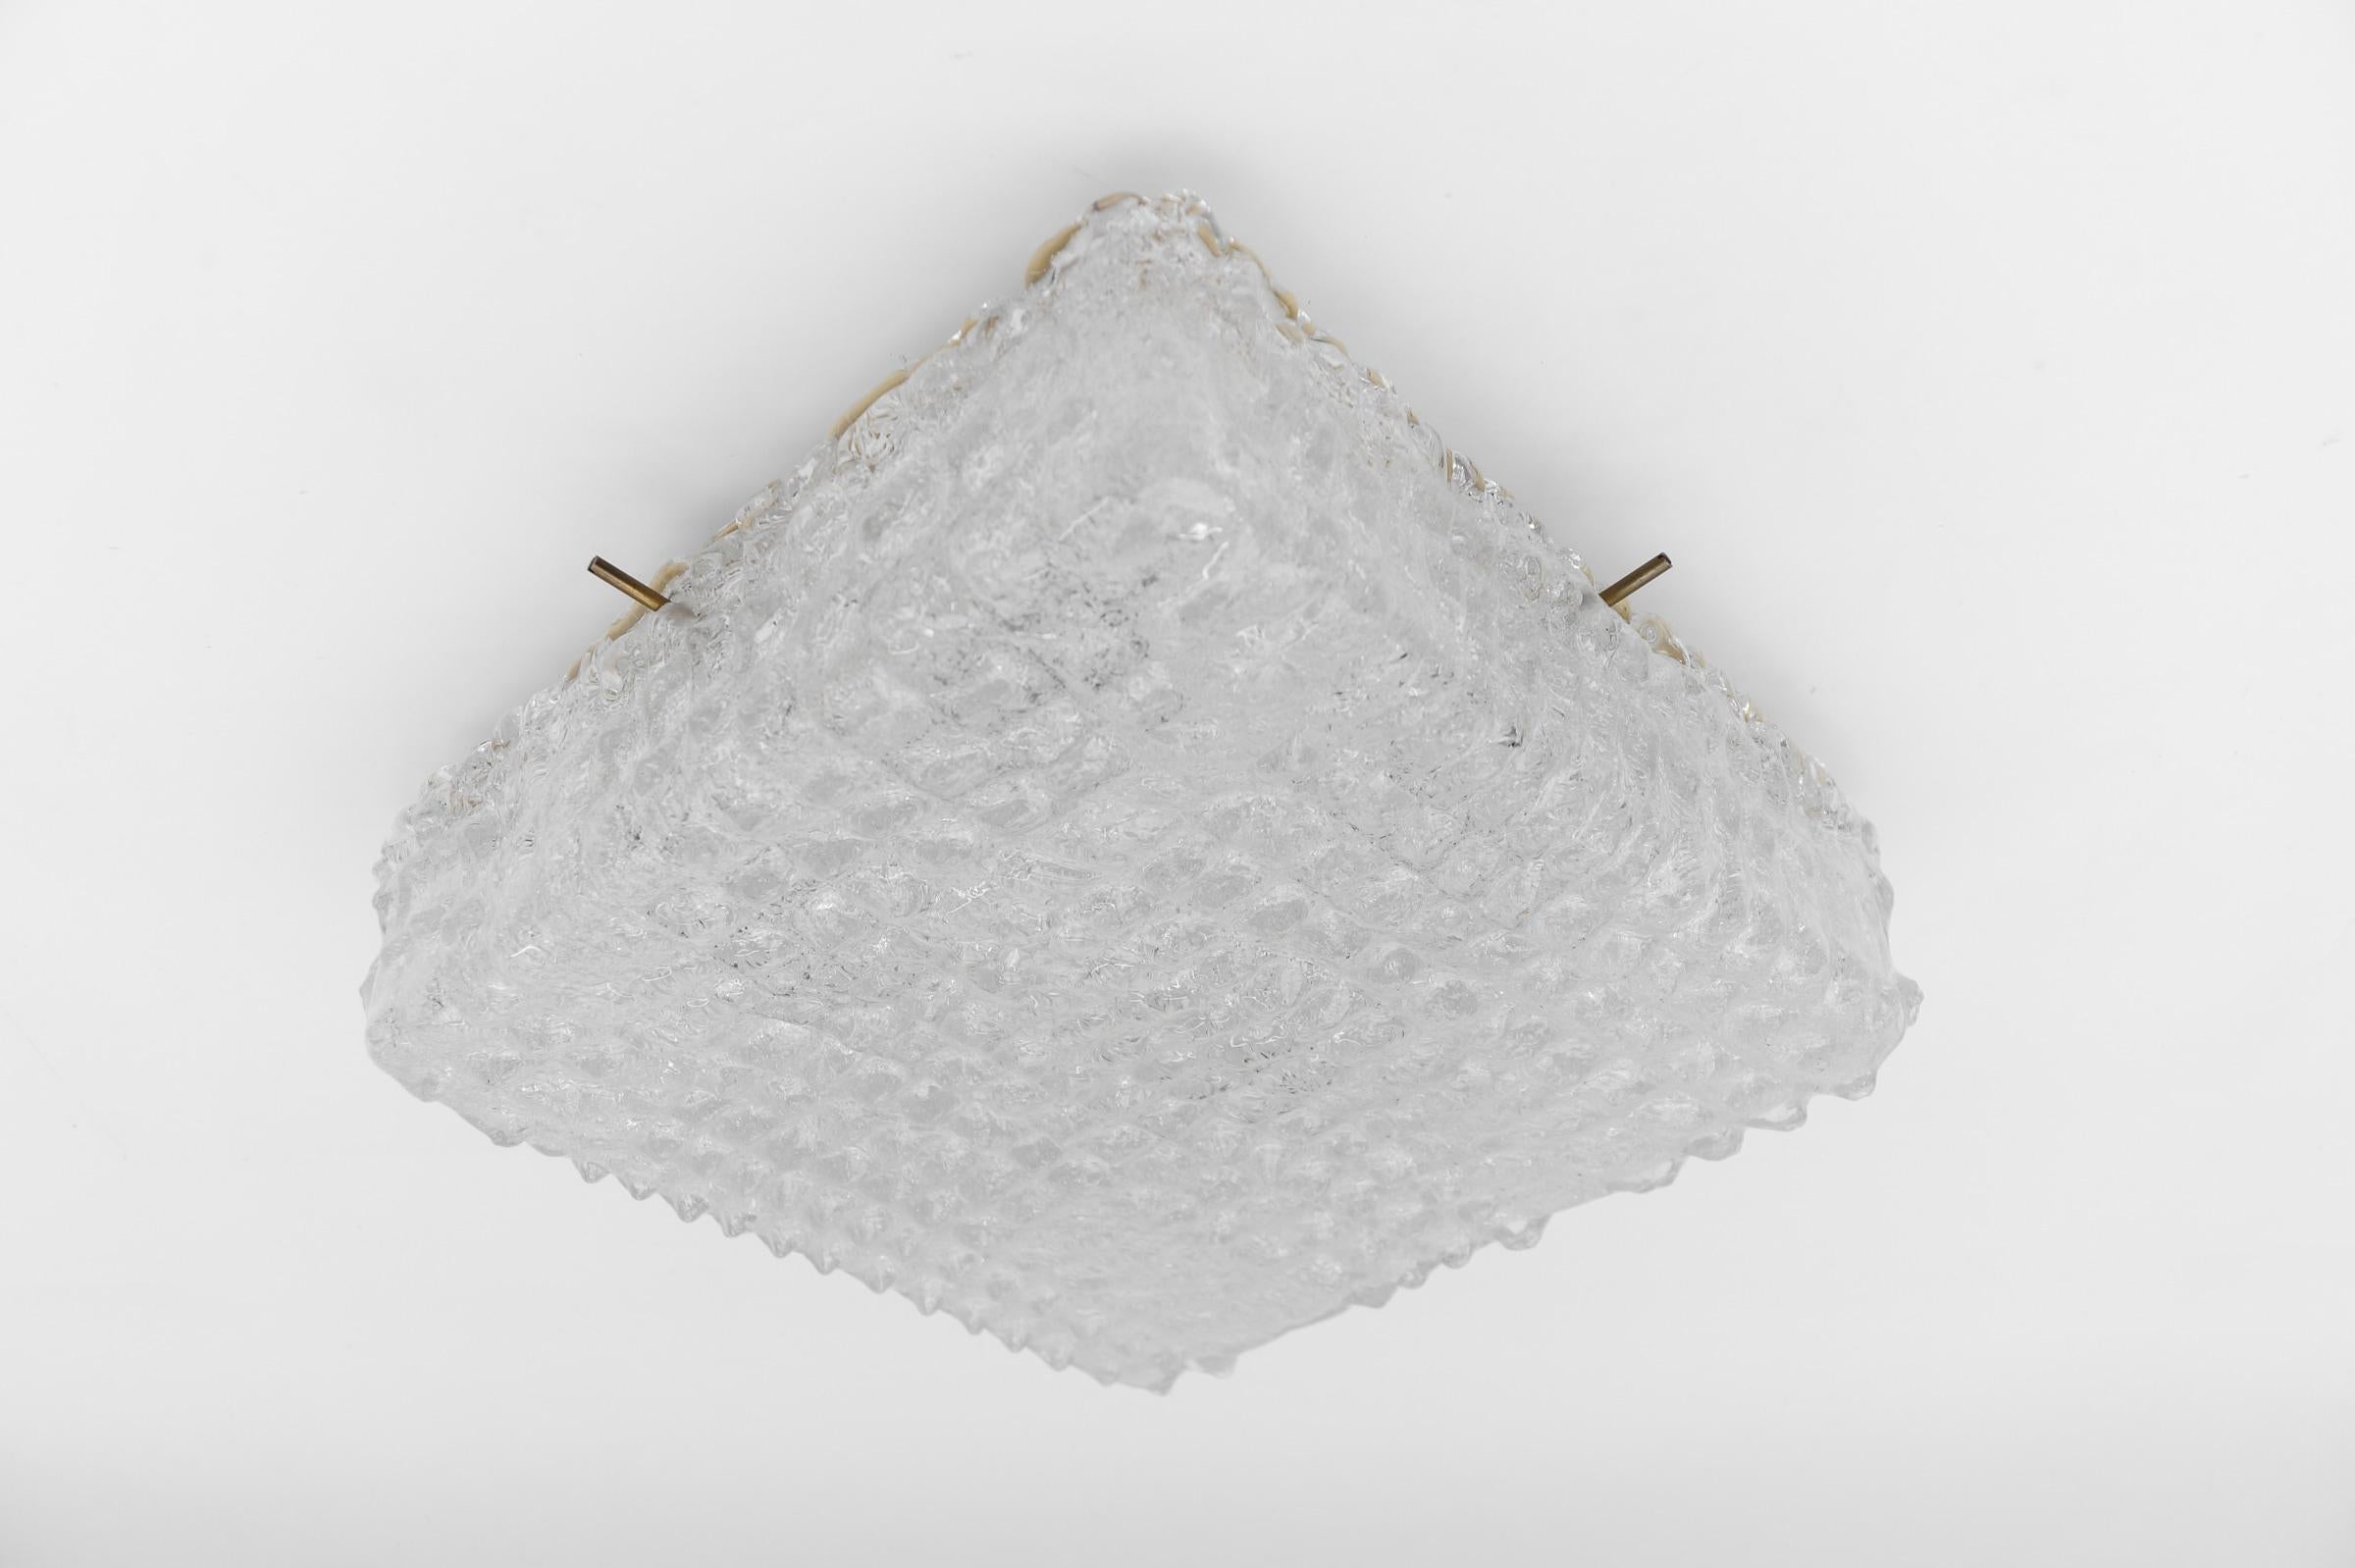 Murano Glass Flush Mount Lamp with Crocodile Skin Surface Texture by Hillebrand For Sale 6